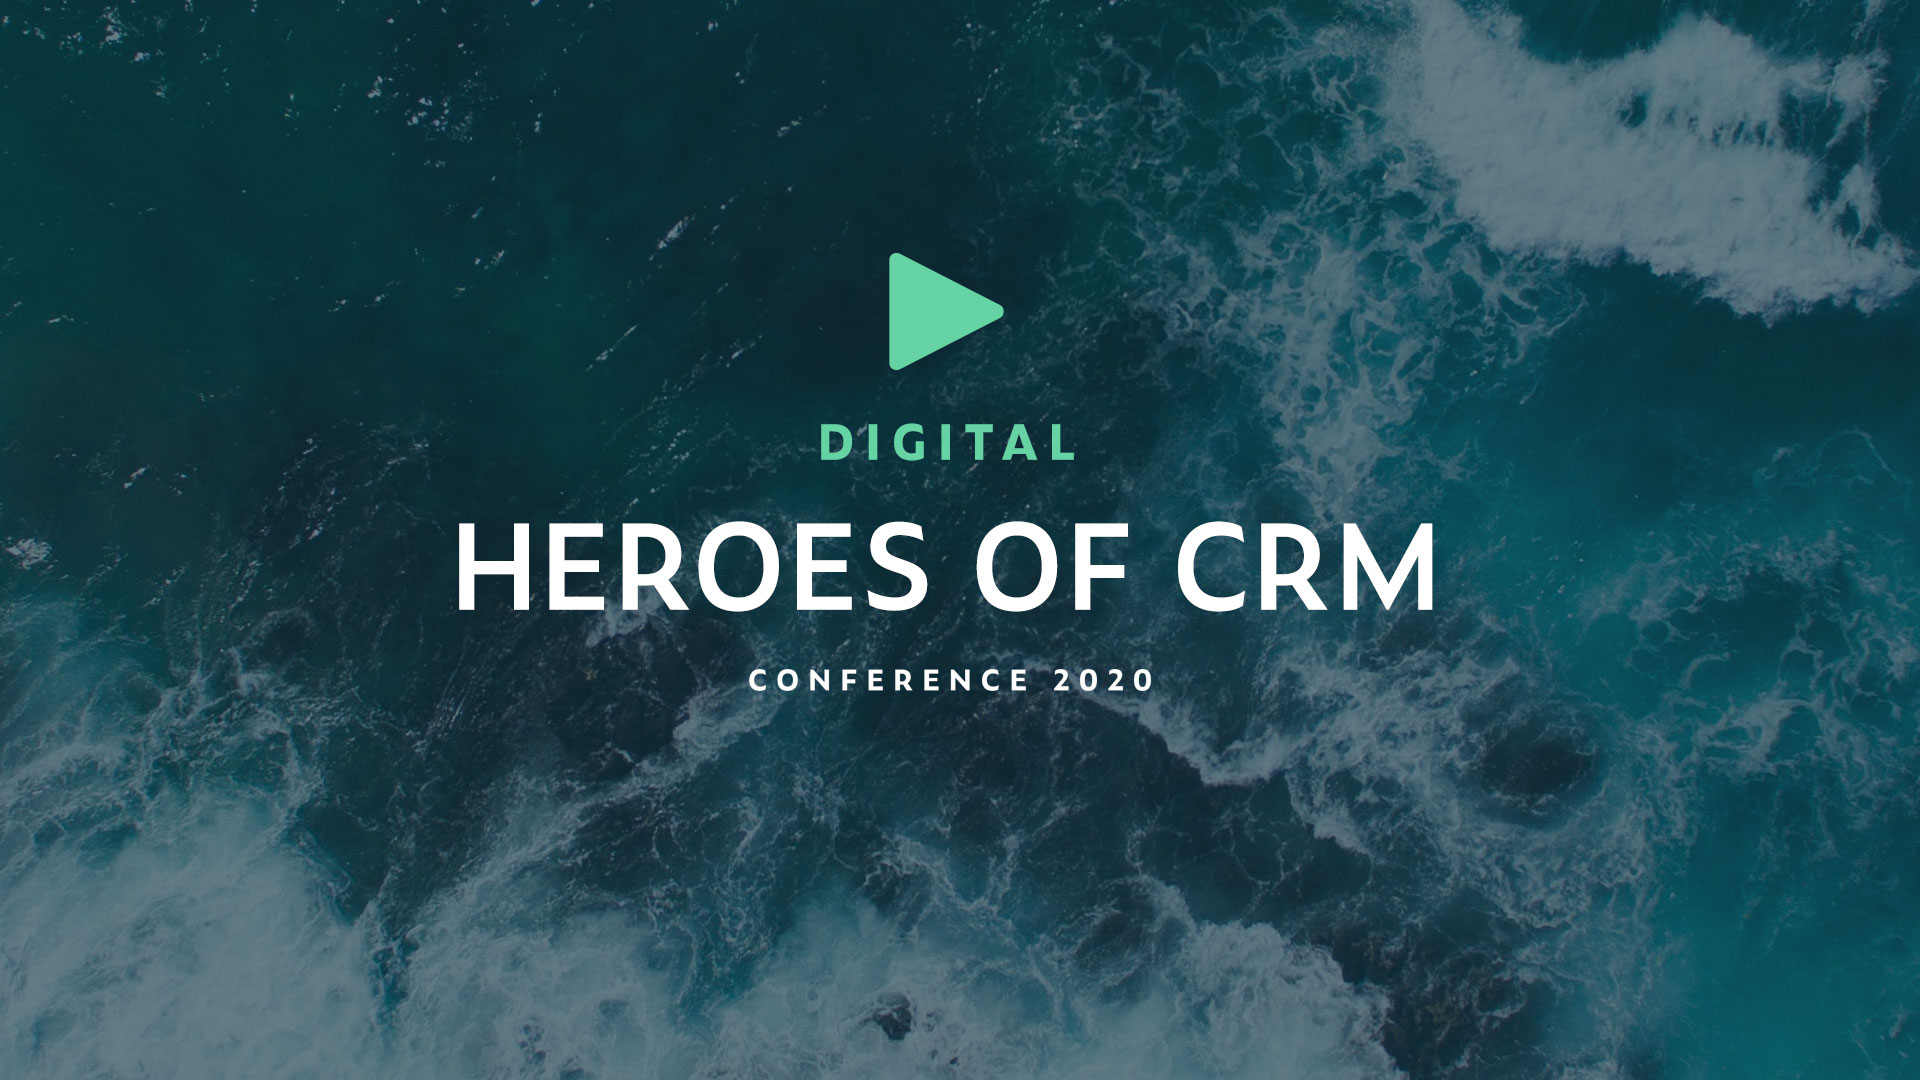 Digital Heroes of CRM Conference 2020